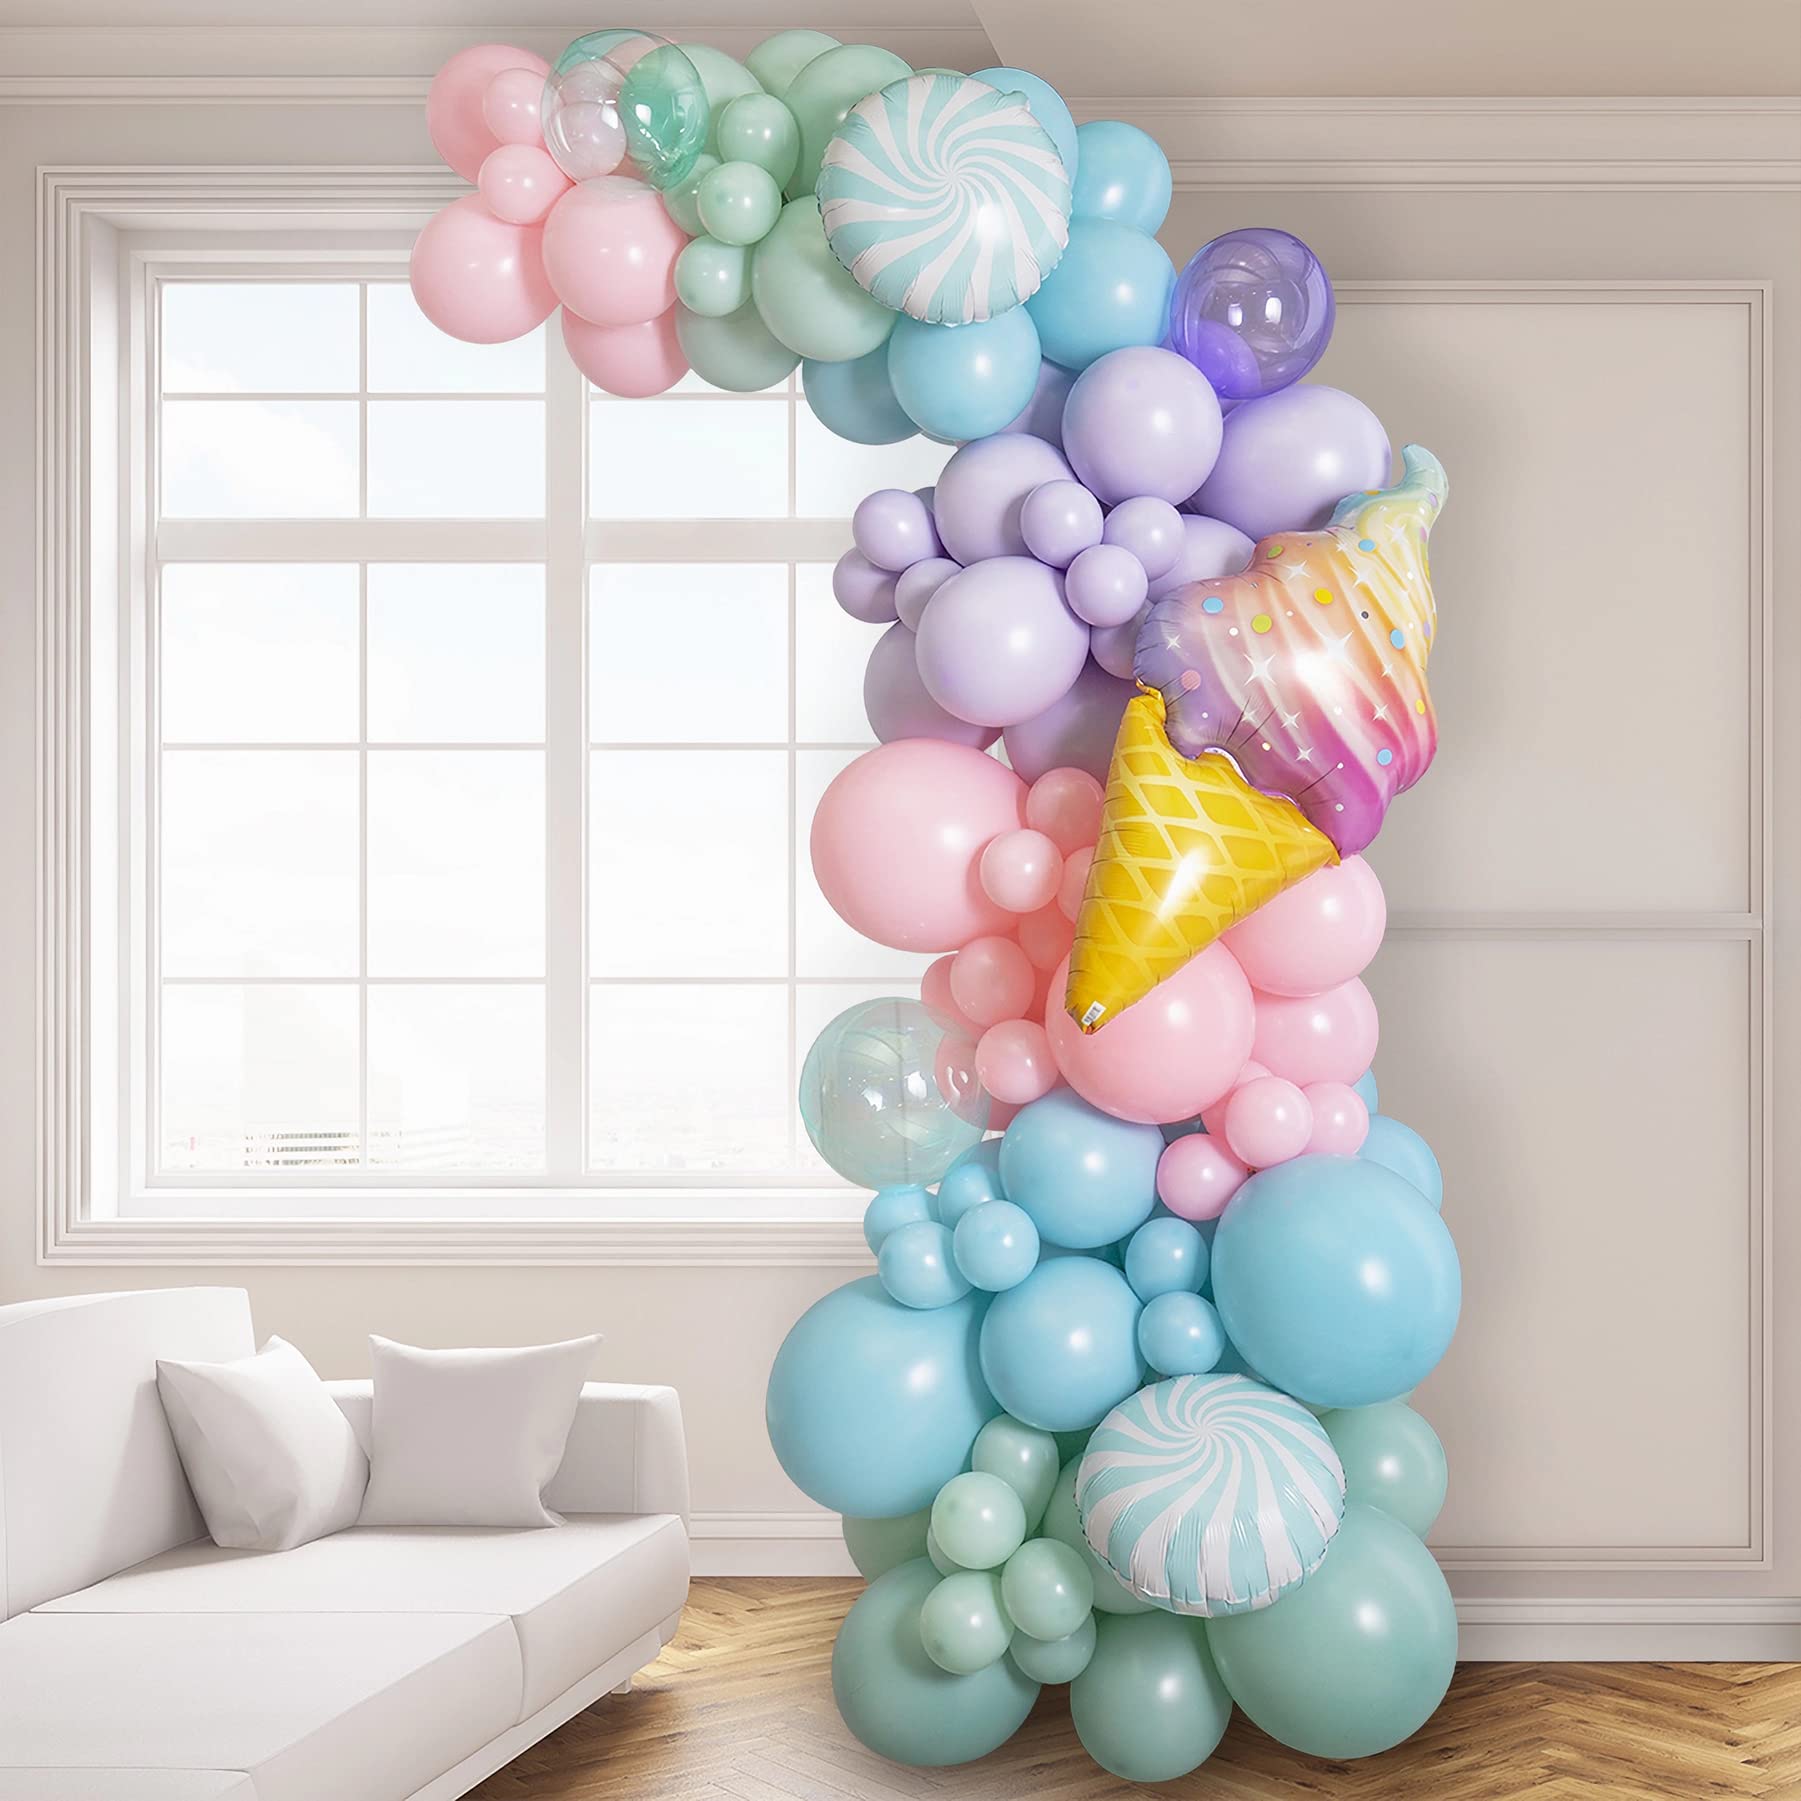 Balloon Arch Kit - Free Bending Shape,8.2ft & 5ft Balloon Column Stand Independent Suspended Standing, 13" Water-Filled Base - Ideal for Weddings, Baby Showers, and Birthday Parties (8.2ft & 5ft)